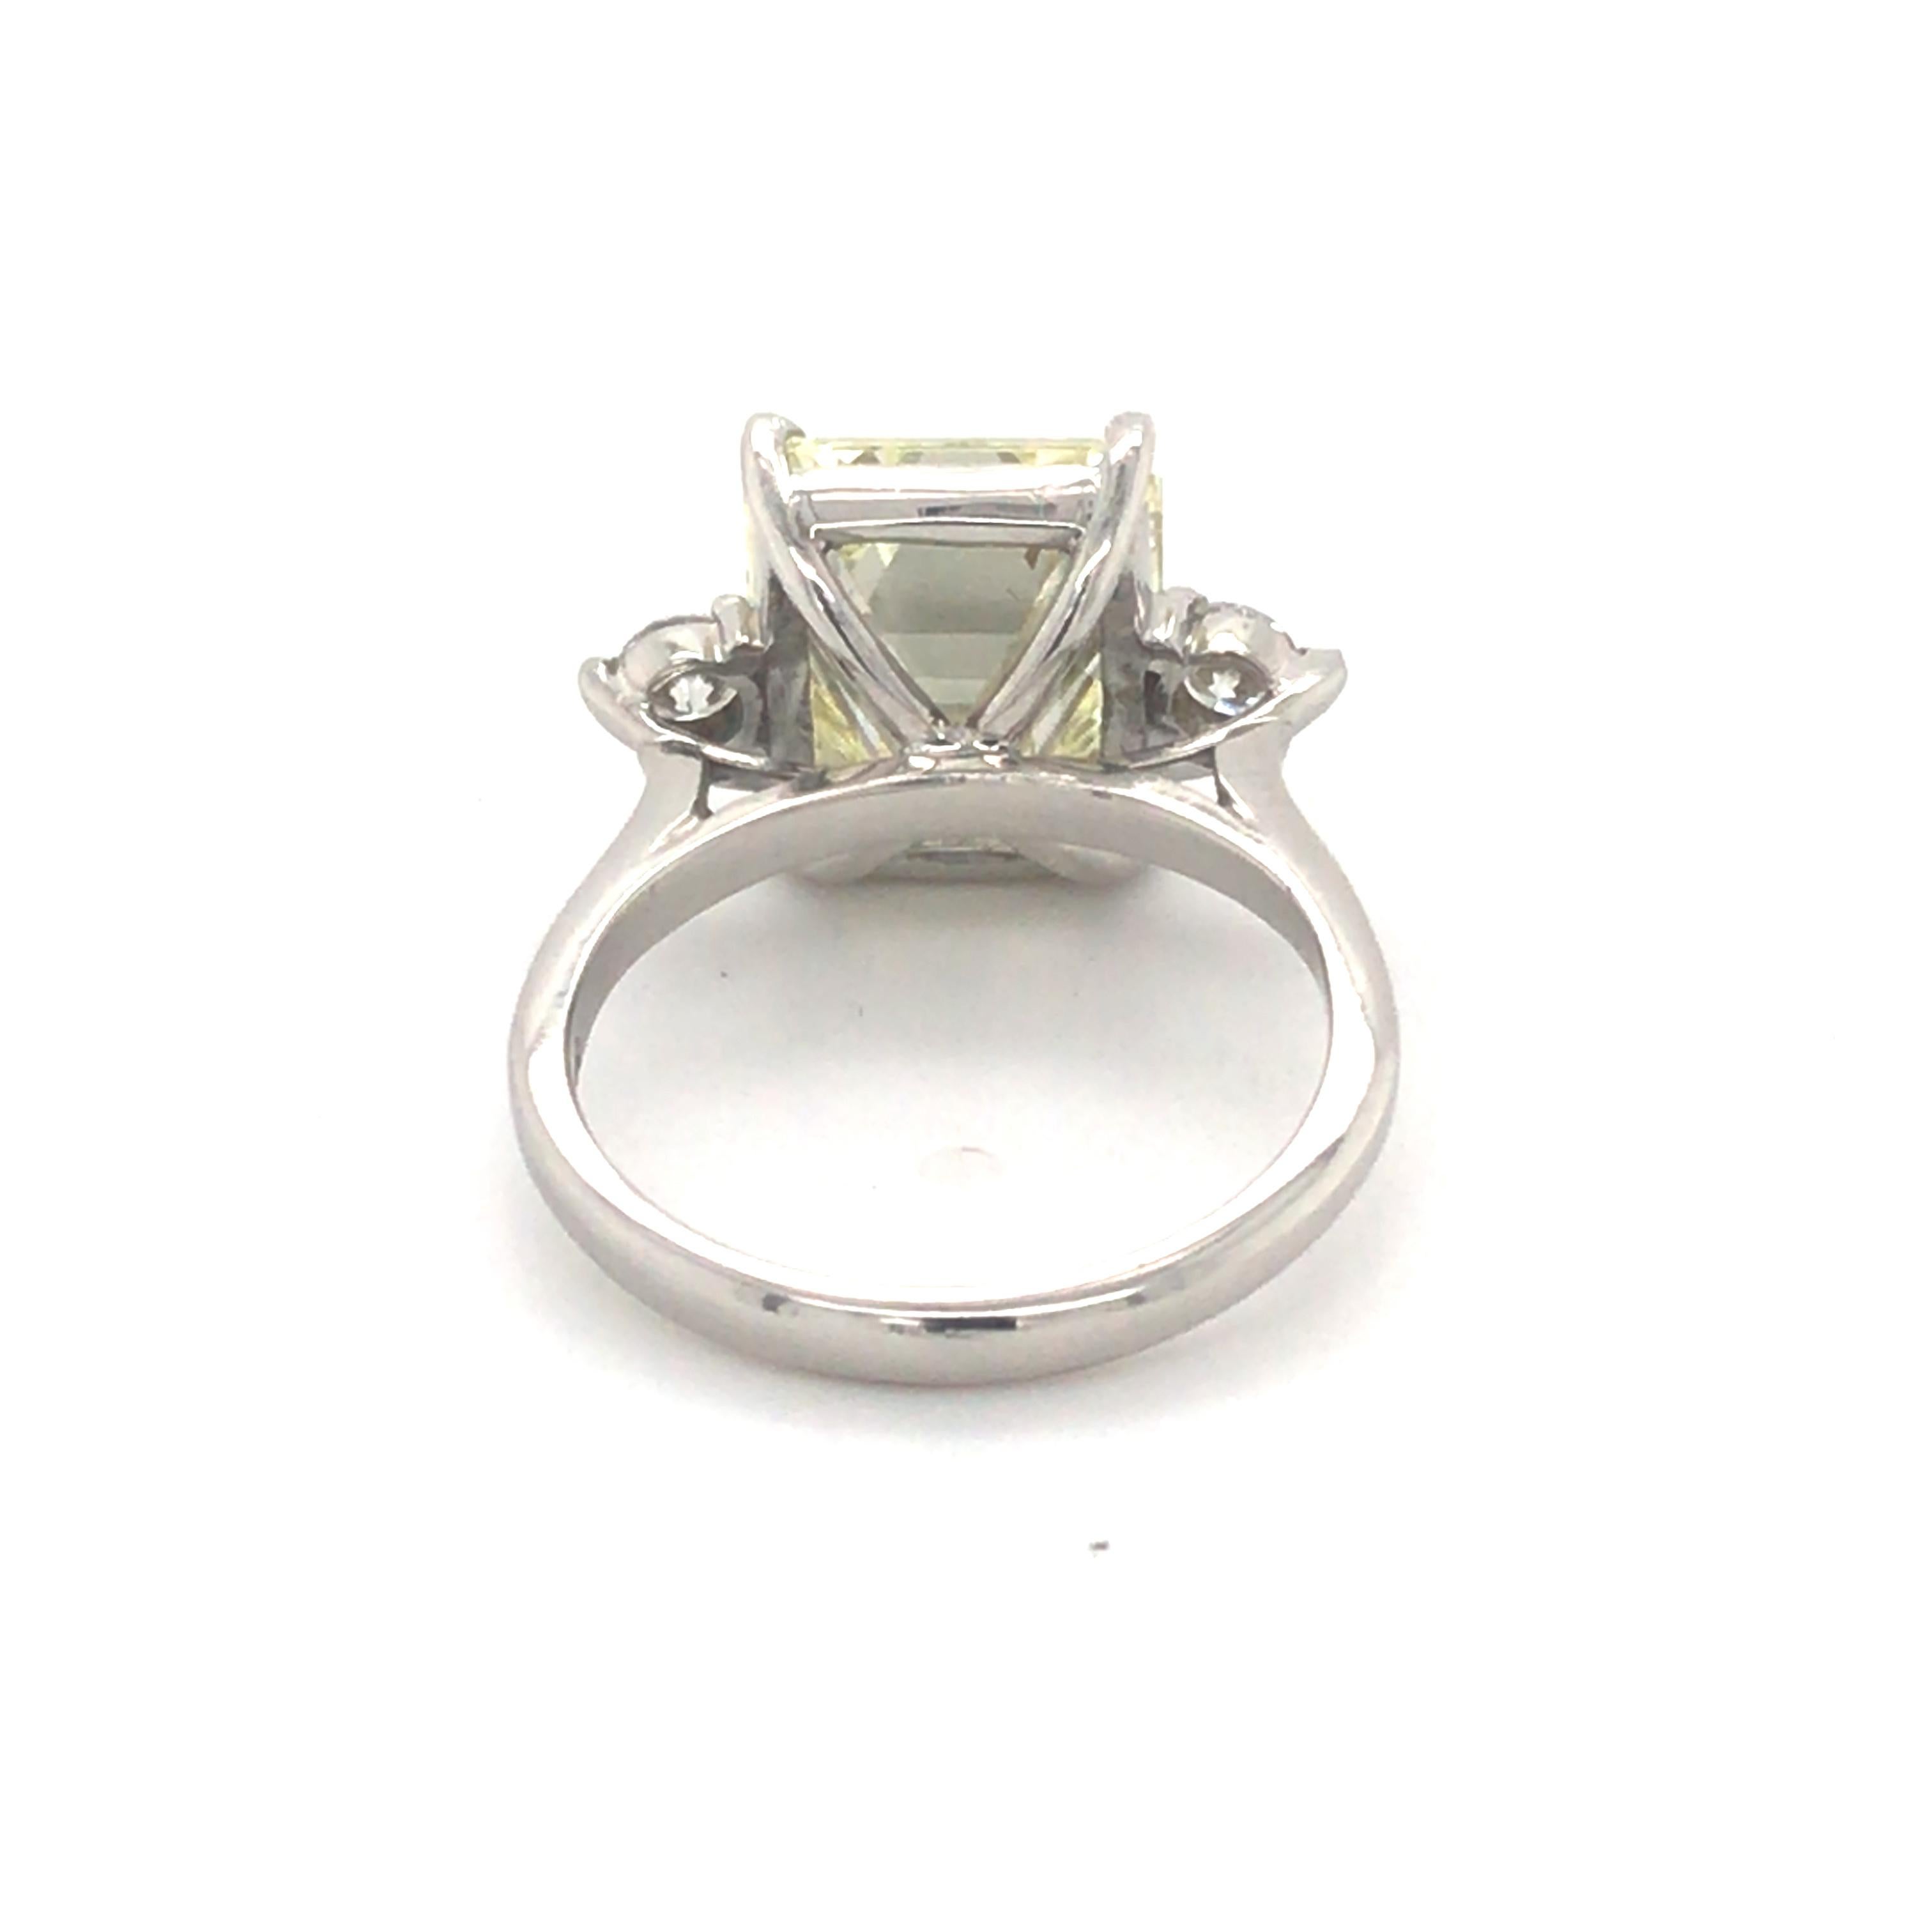 Auscert certified emerald cut diamond 6.375ct P VS1, measuring 11.71mm x 10.22m x 6.06mm set in 18ct white gold with 2 brilliant cut diamonds either side with total weight for the 2 = 0.28ct GHSI.
A lovely quality stone enhanced in a simple white